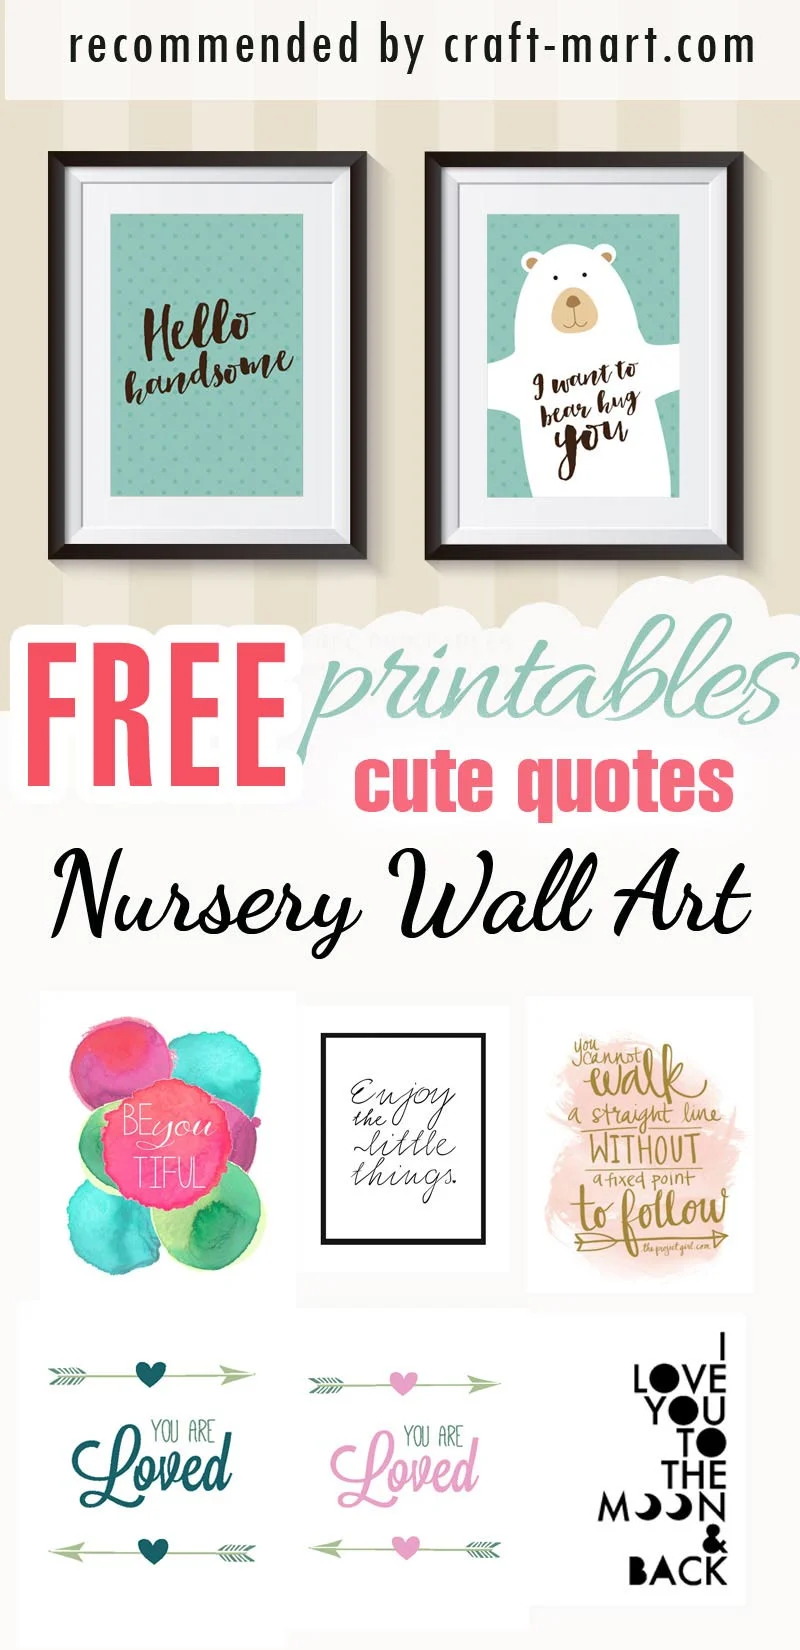 Cute Quotes and Saying Nursery Wall Art Free Printables #freeprintables #freenurseryprintables #freenurserywallart #cutenurseryprints #cutequotesfreeprintables #freenurseryprints